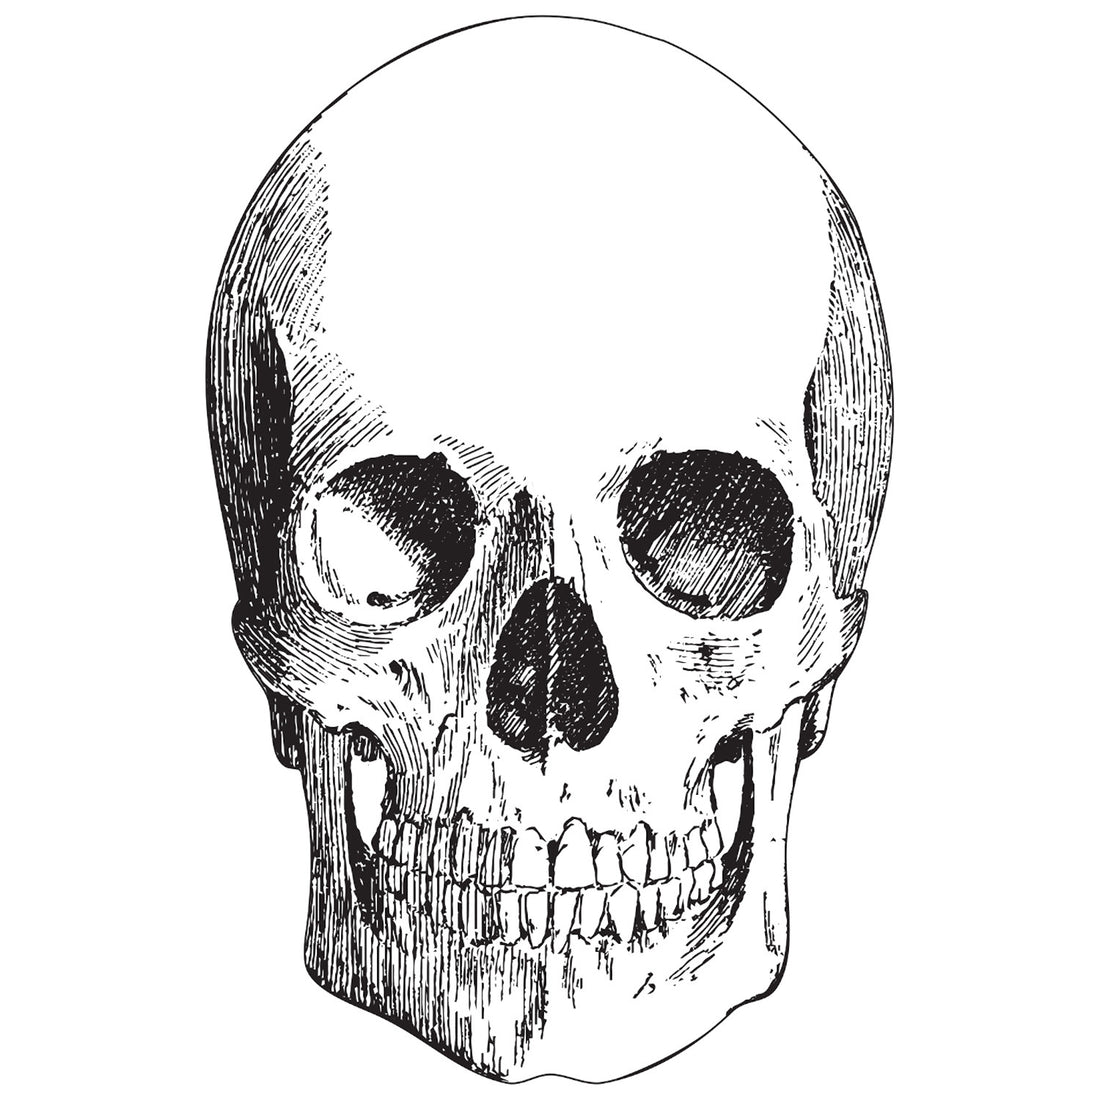 A die-cut, etching-style illustration of a human skull facing straight ahead, in black linework over white.